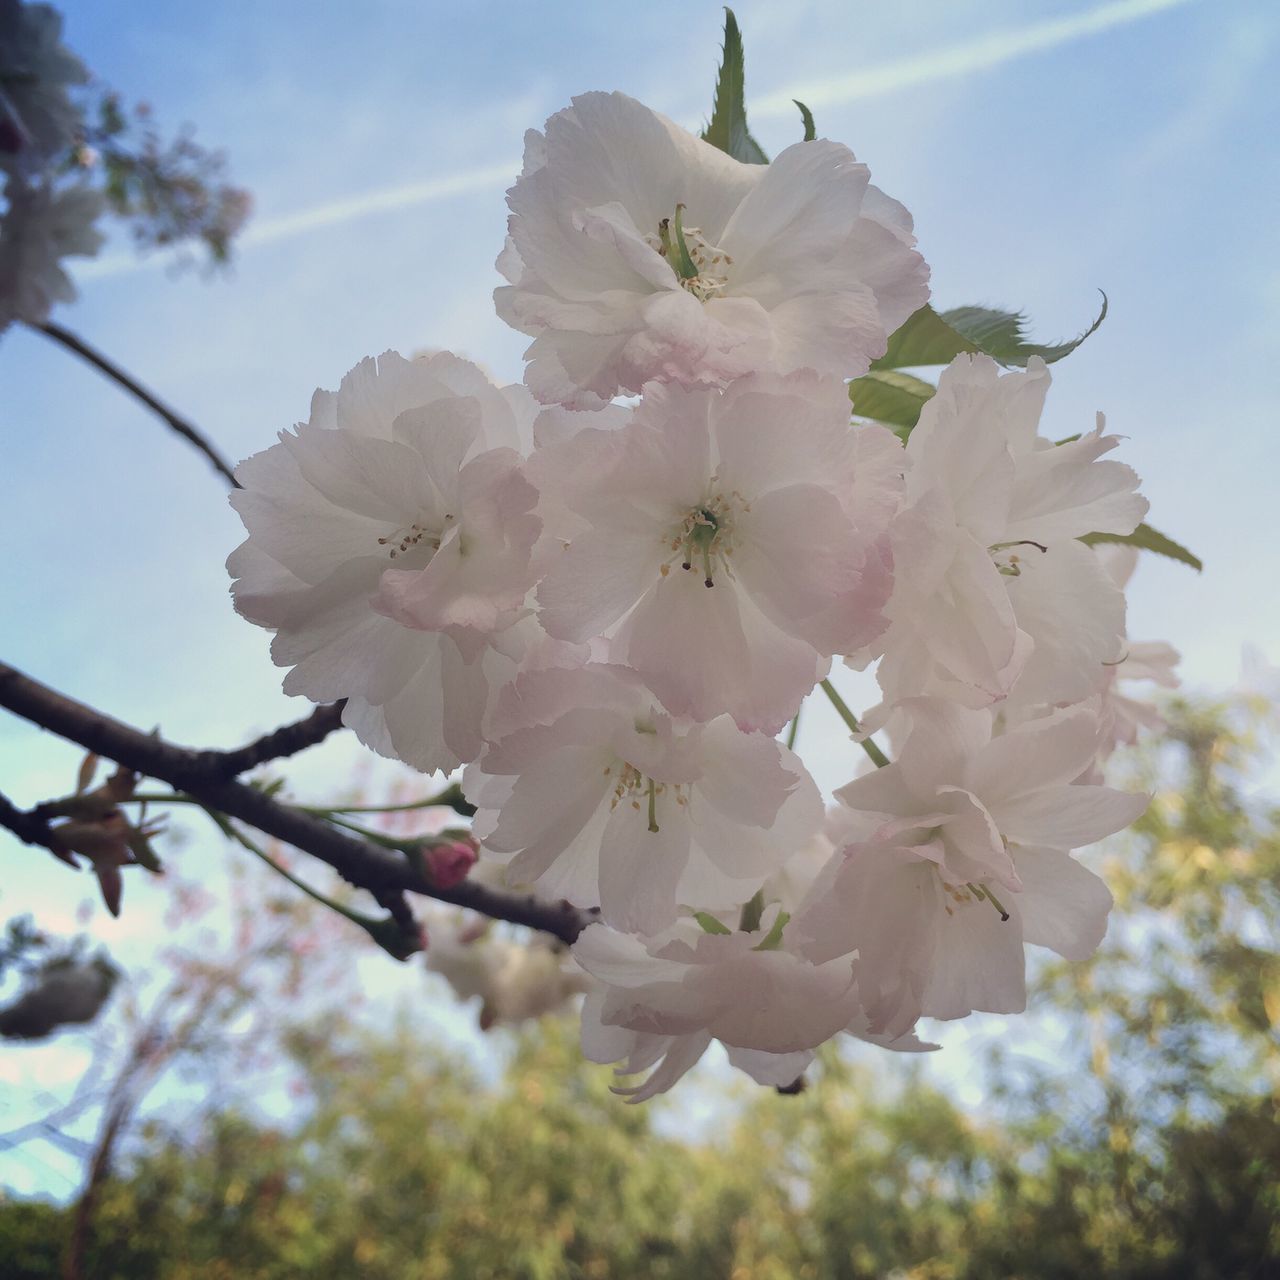 flower, freshness, tree, branch, growth, fragility, cherry blossom, low angle view, beauty in nature, blossom, cherry tree, petal, nature, sky, in bloom, blooming, springtime, close-up, focus on foreground, fruit tree